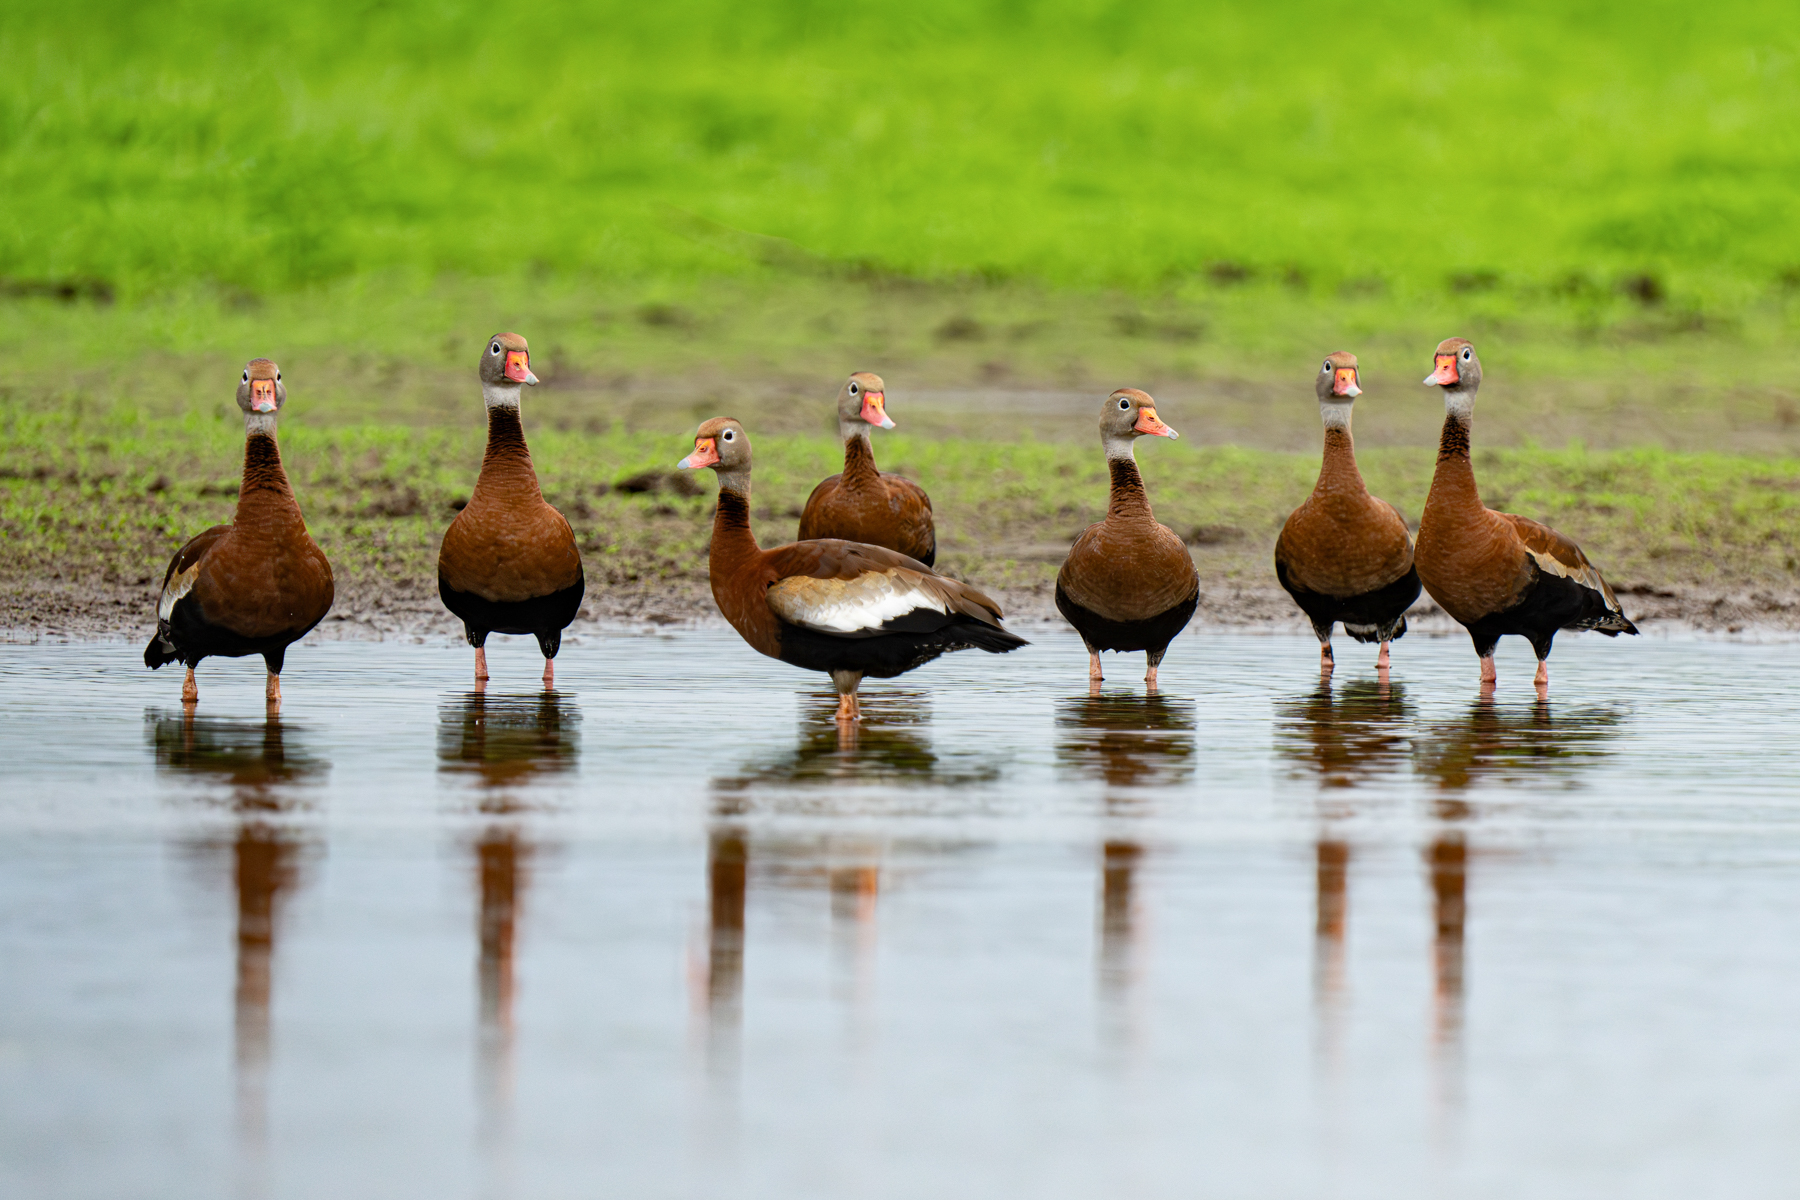 A flock of Black-bellied Whistling Ducks on the Rio Frio (image by Inger Vandyke)